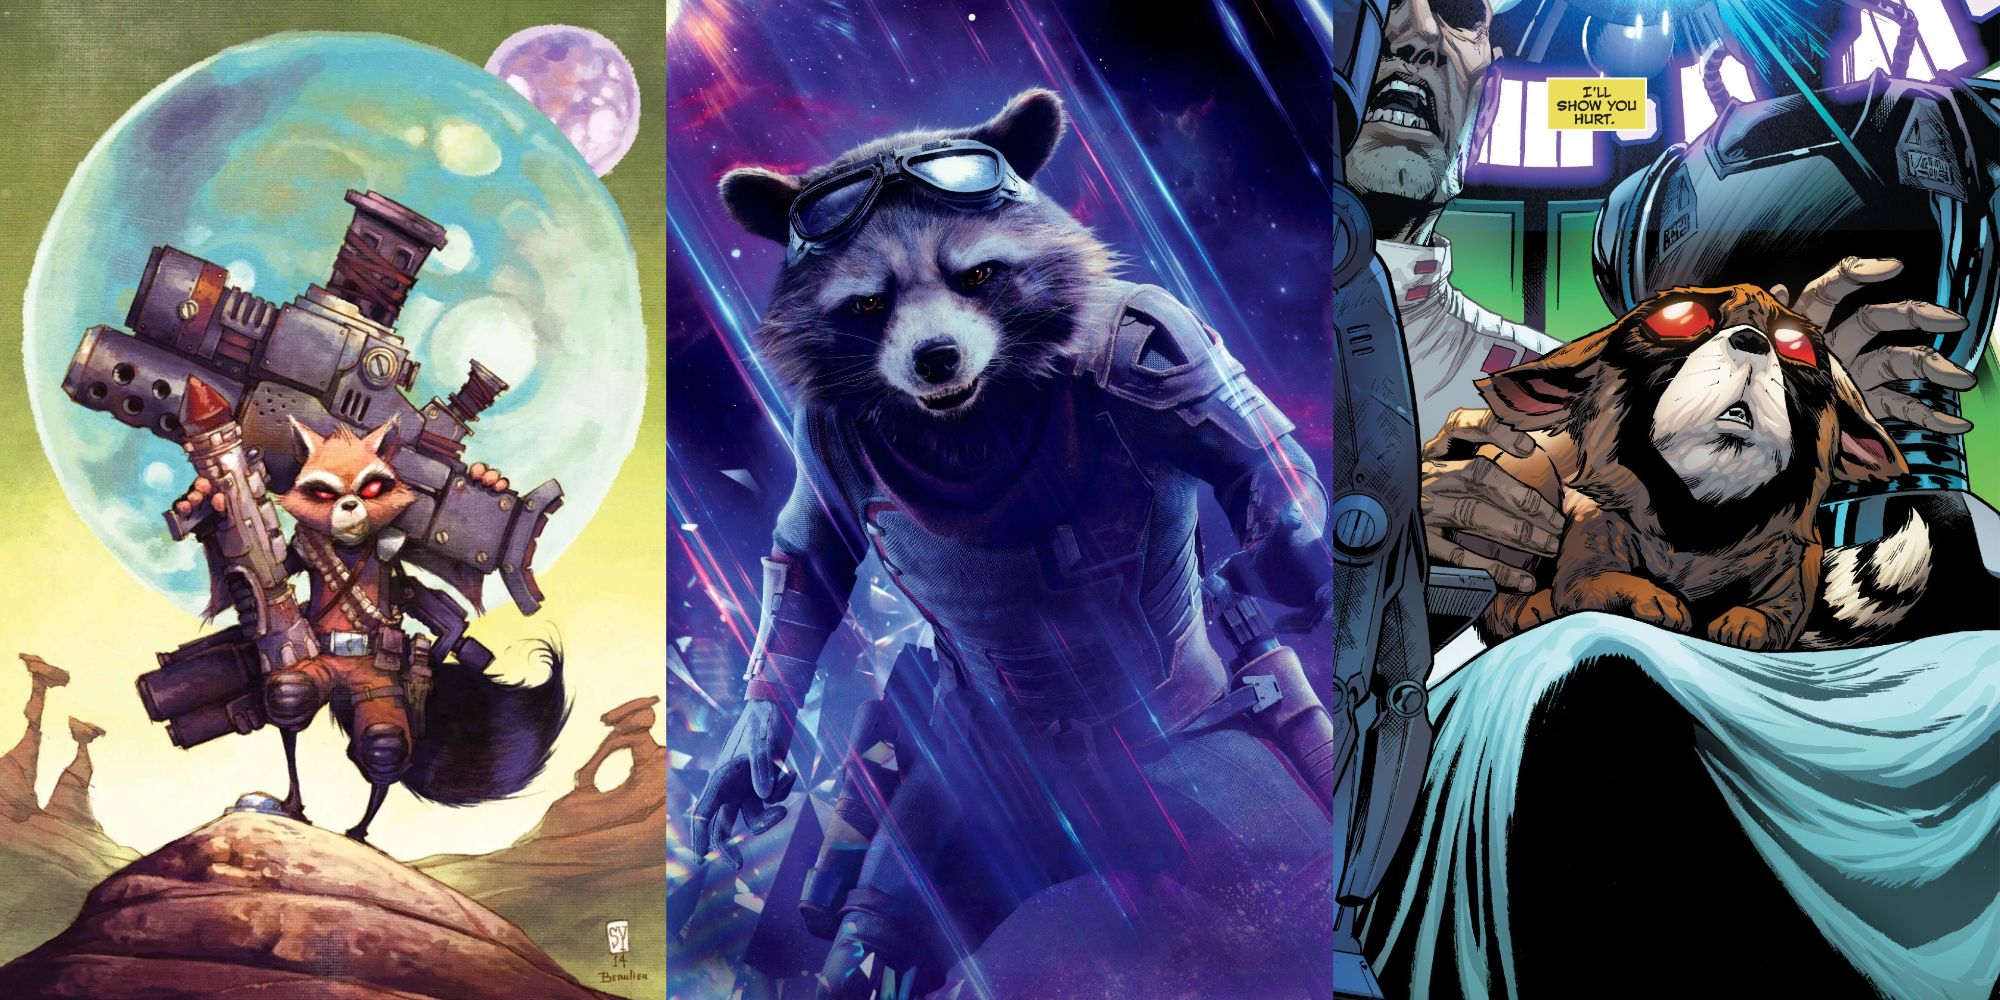 Split image of Rocket Raccoon holding guns in Marvel Comics, Rocket from the MCU, and Rocket's origin from the comics.